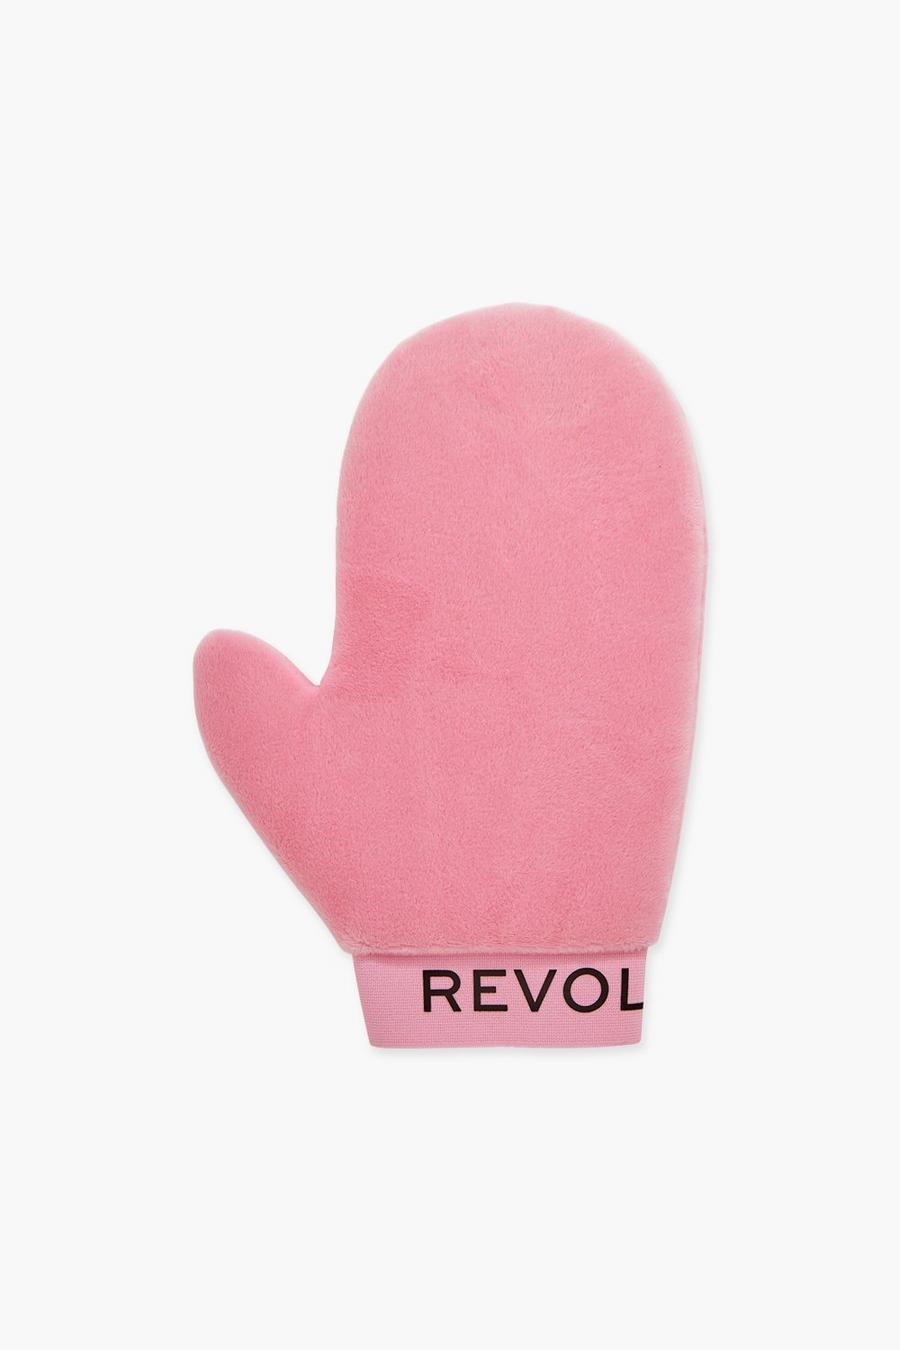 Revolution Beauty - Guanto abbronzante rosa, Pink image number 1